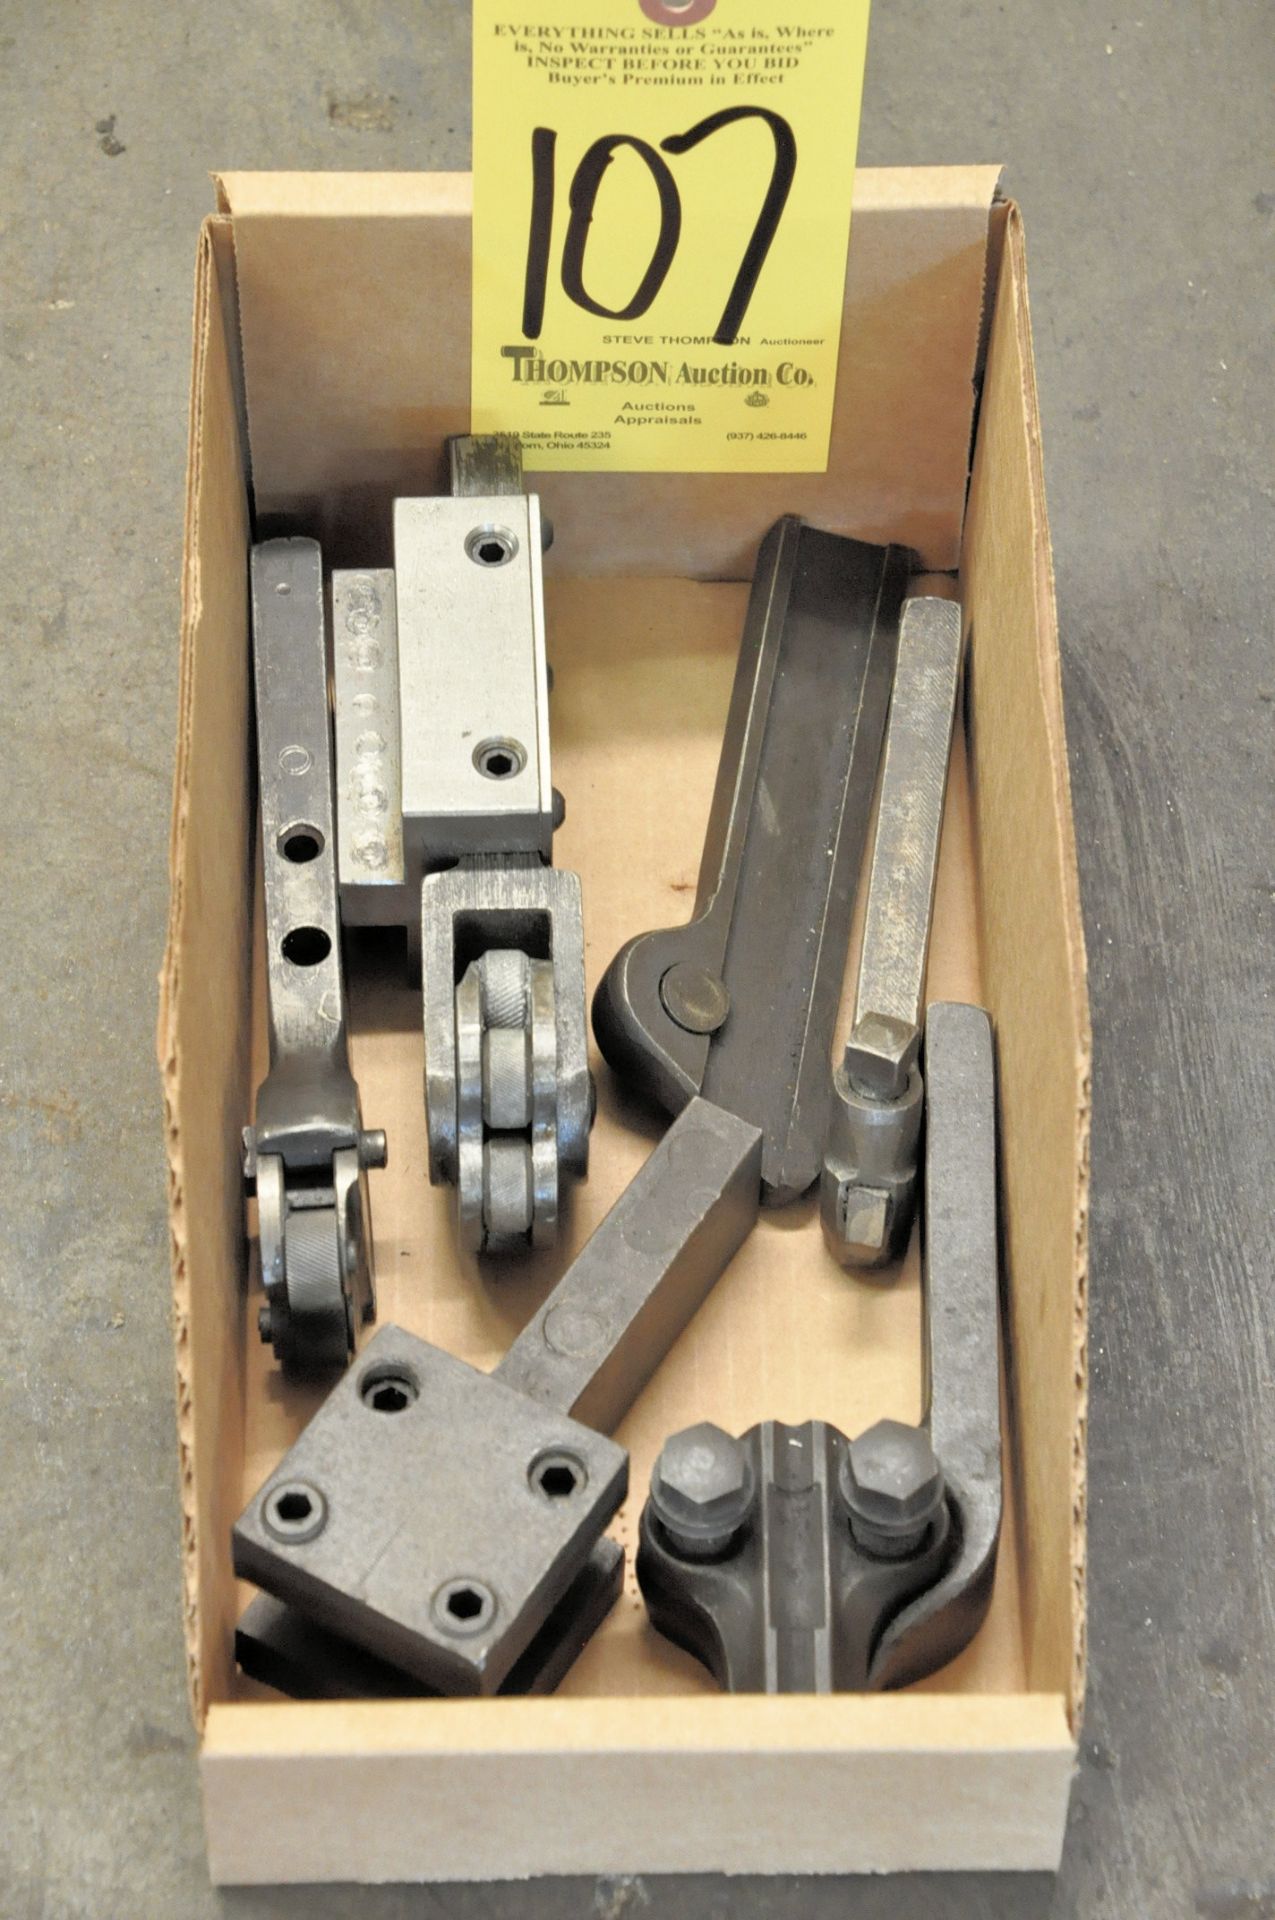 Knurling Tools and Boring Bars in (1) Box